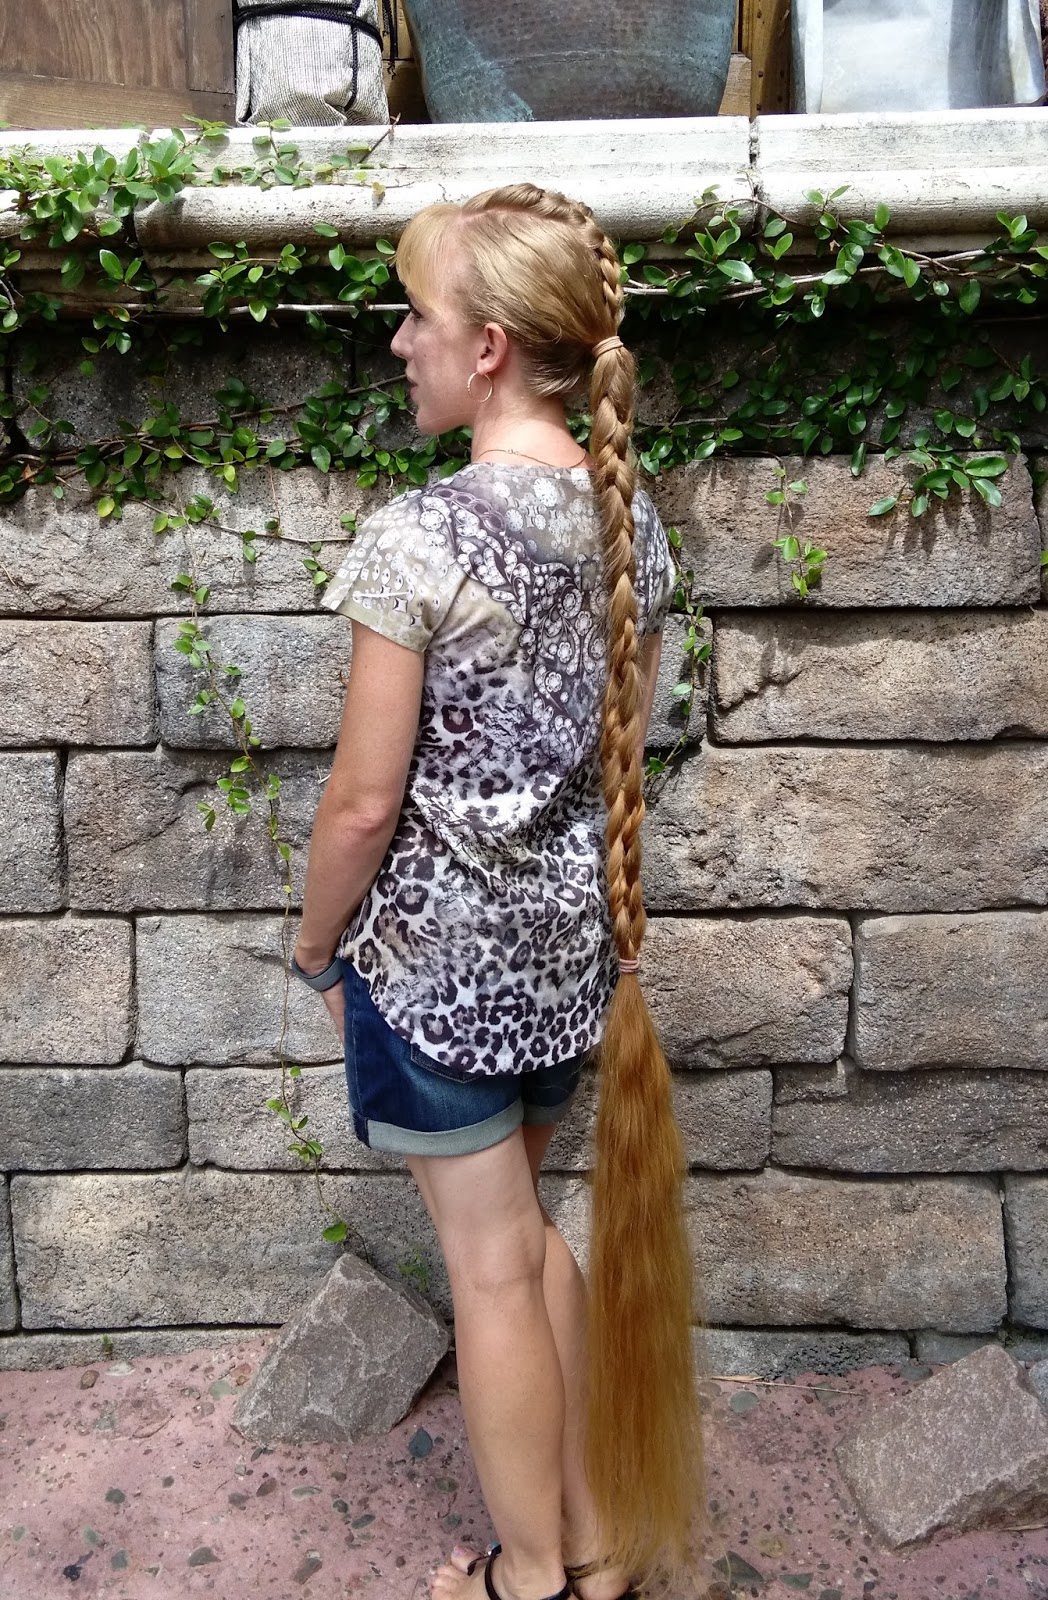 Ankle-Length Braided Ponytail.